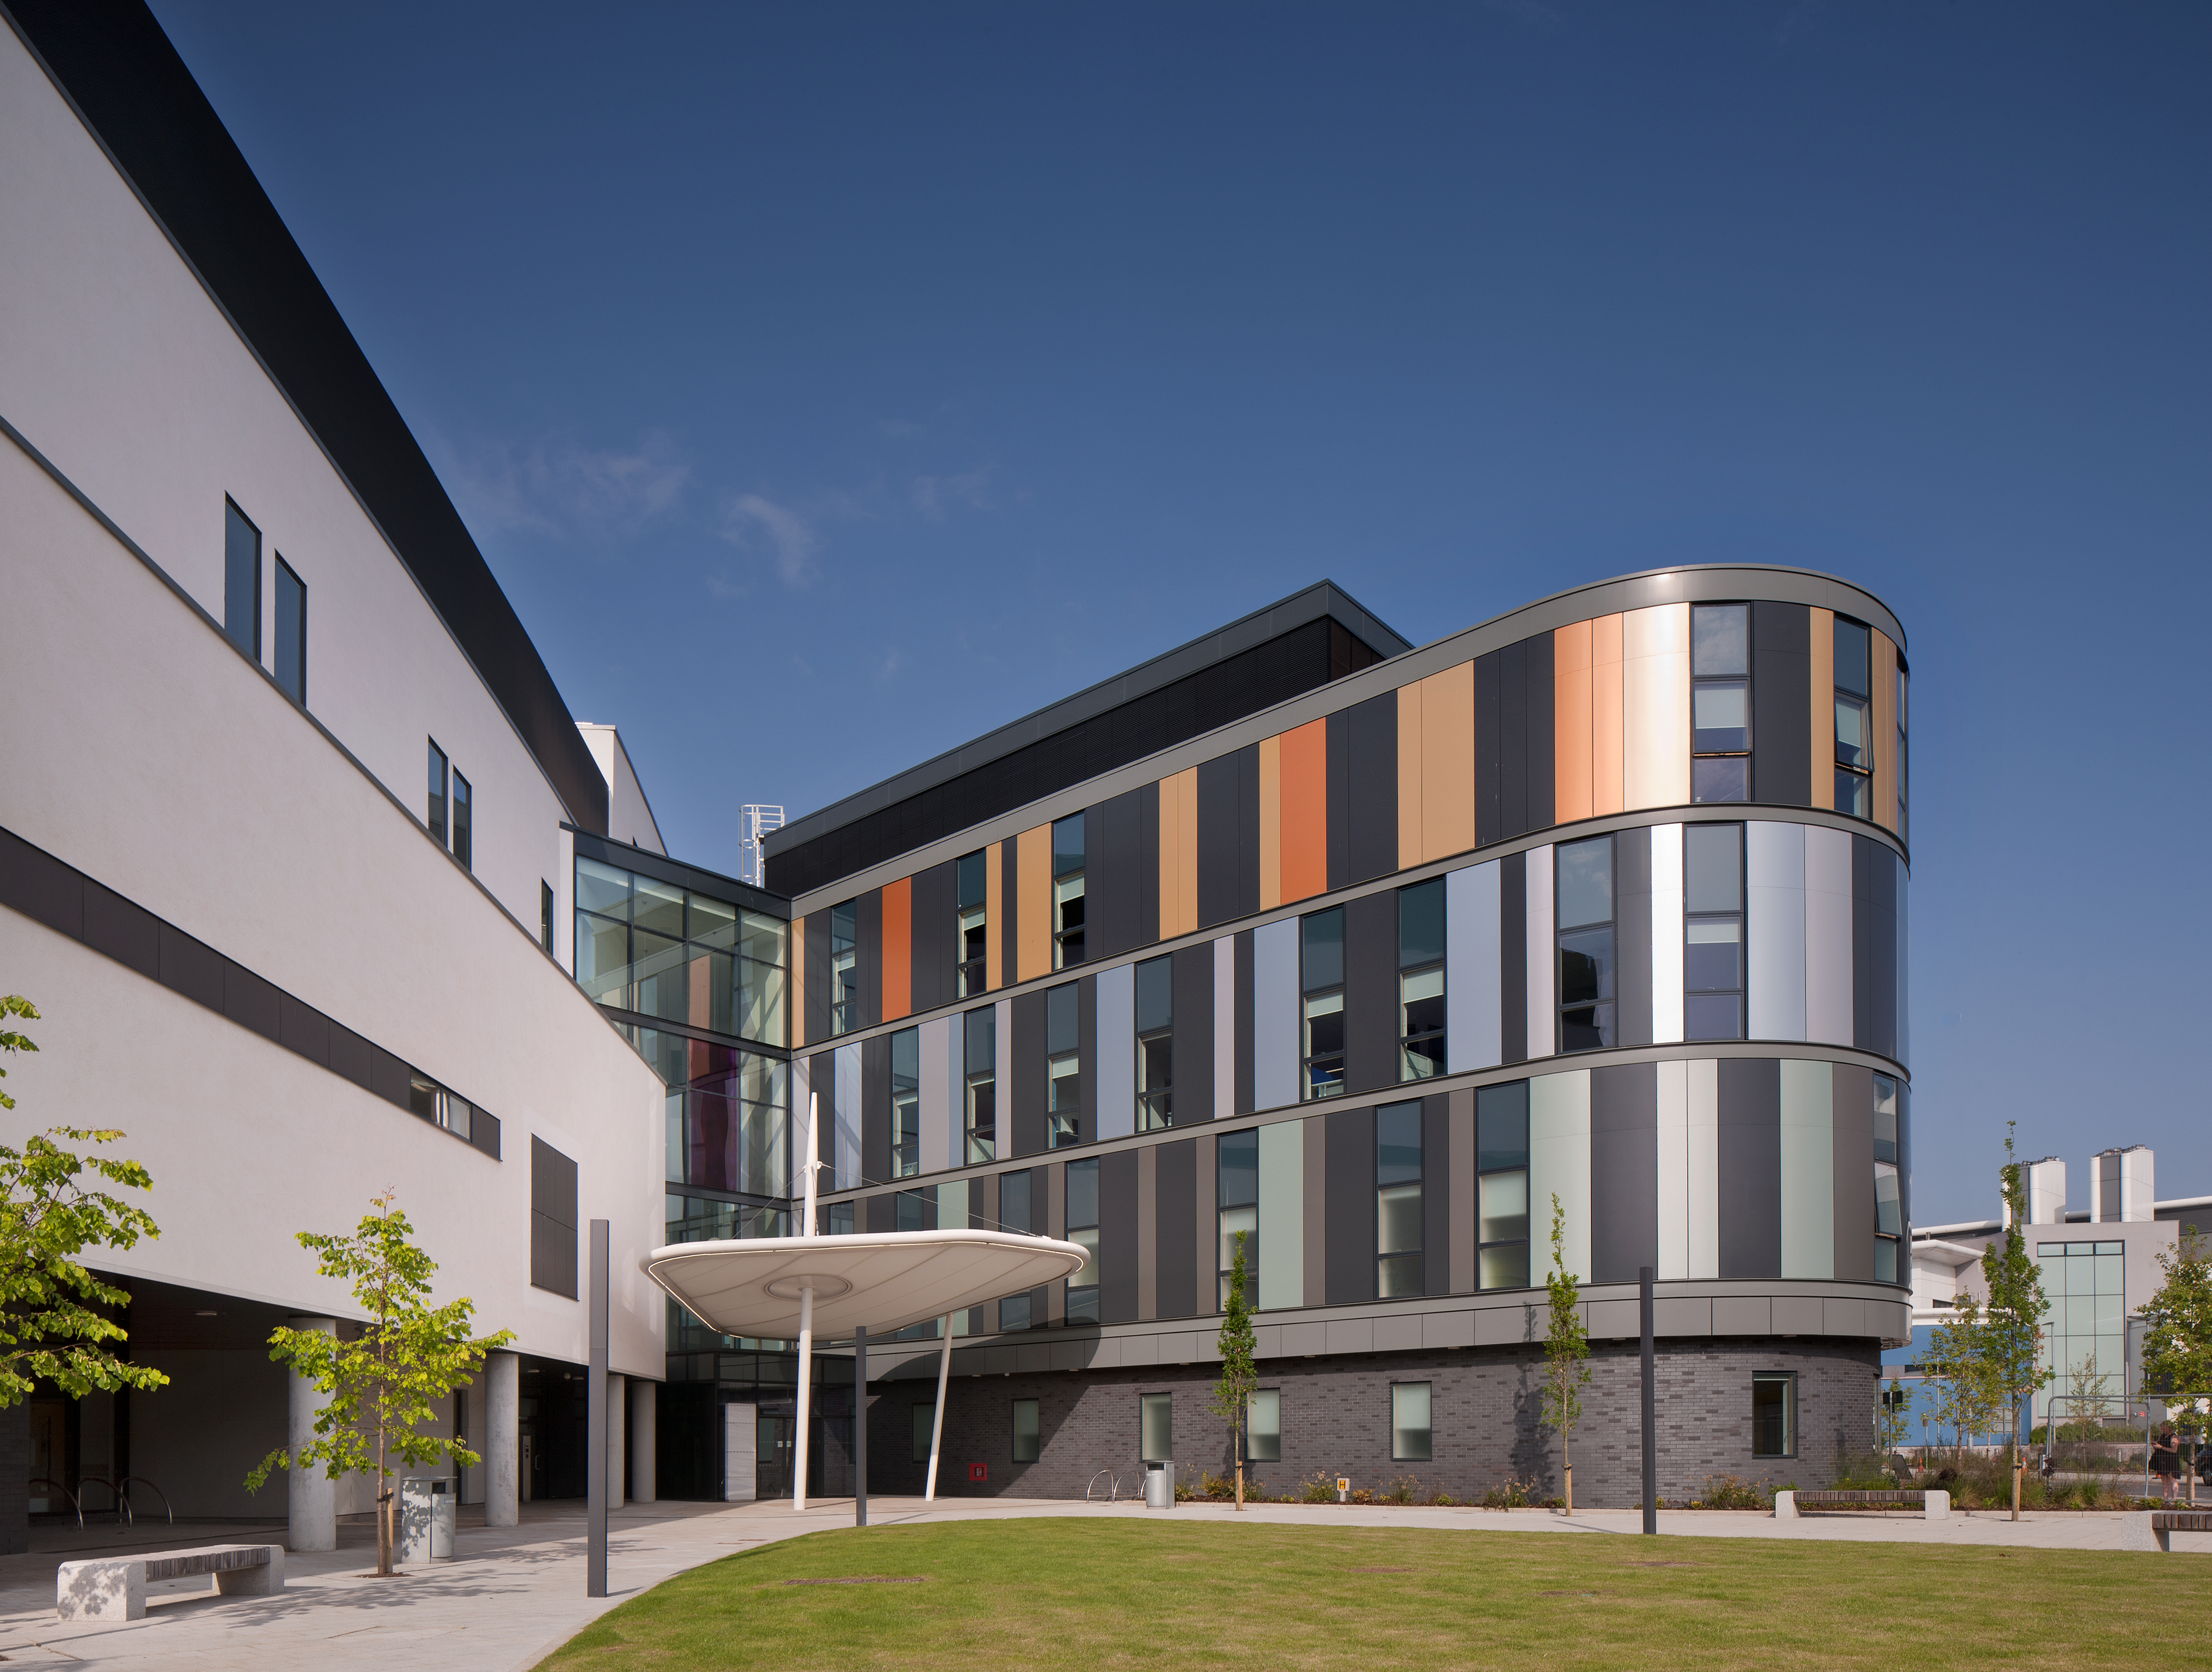 HLM excited for opening of NHS Lothian's children's hospital